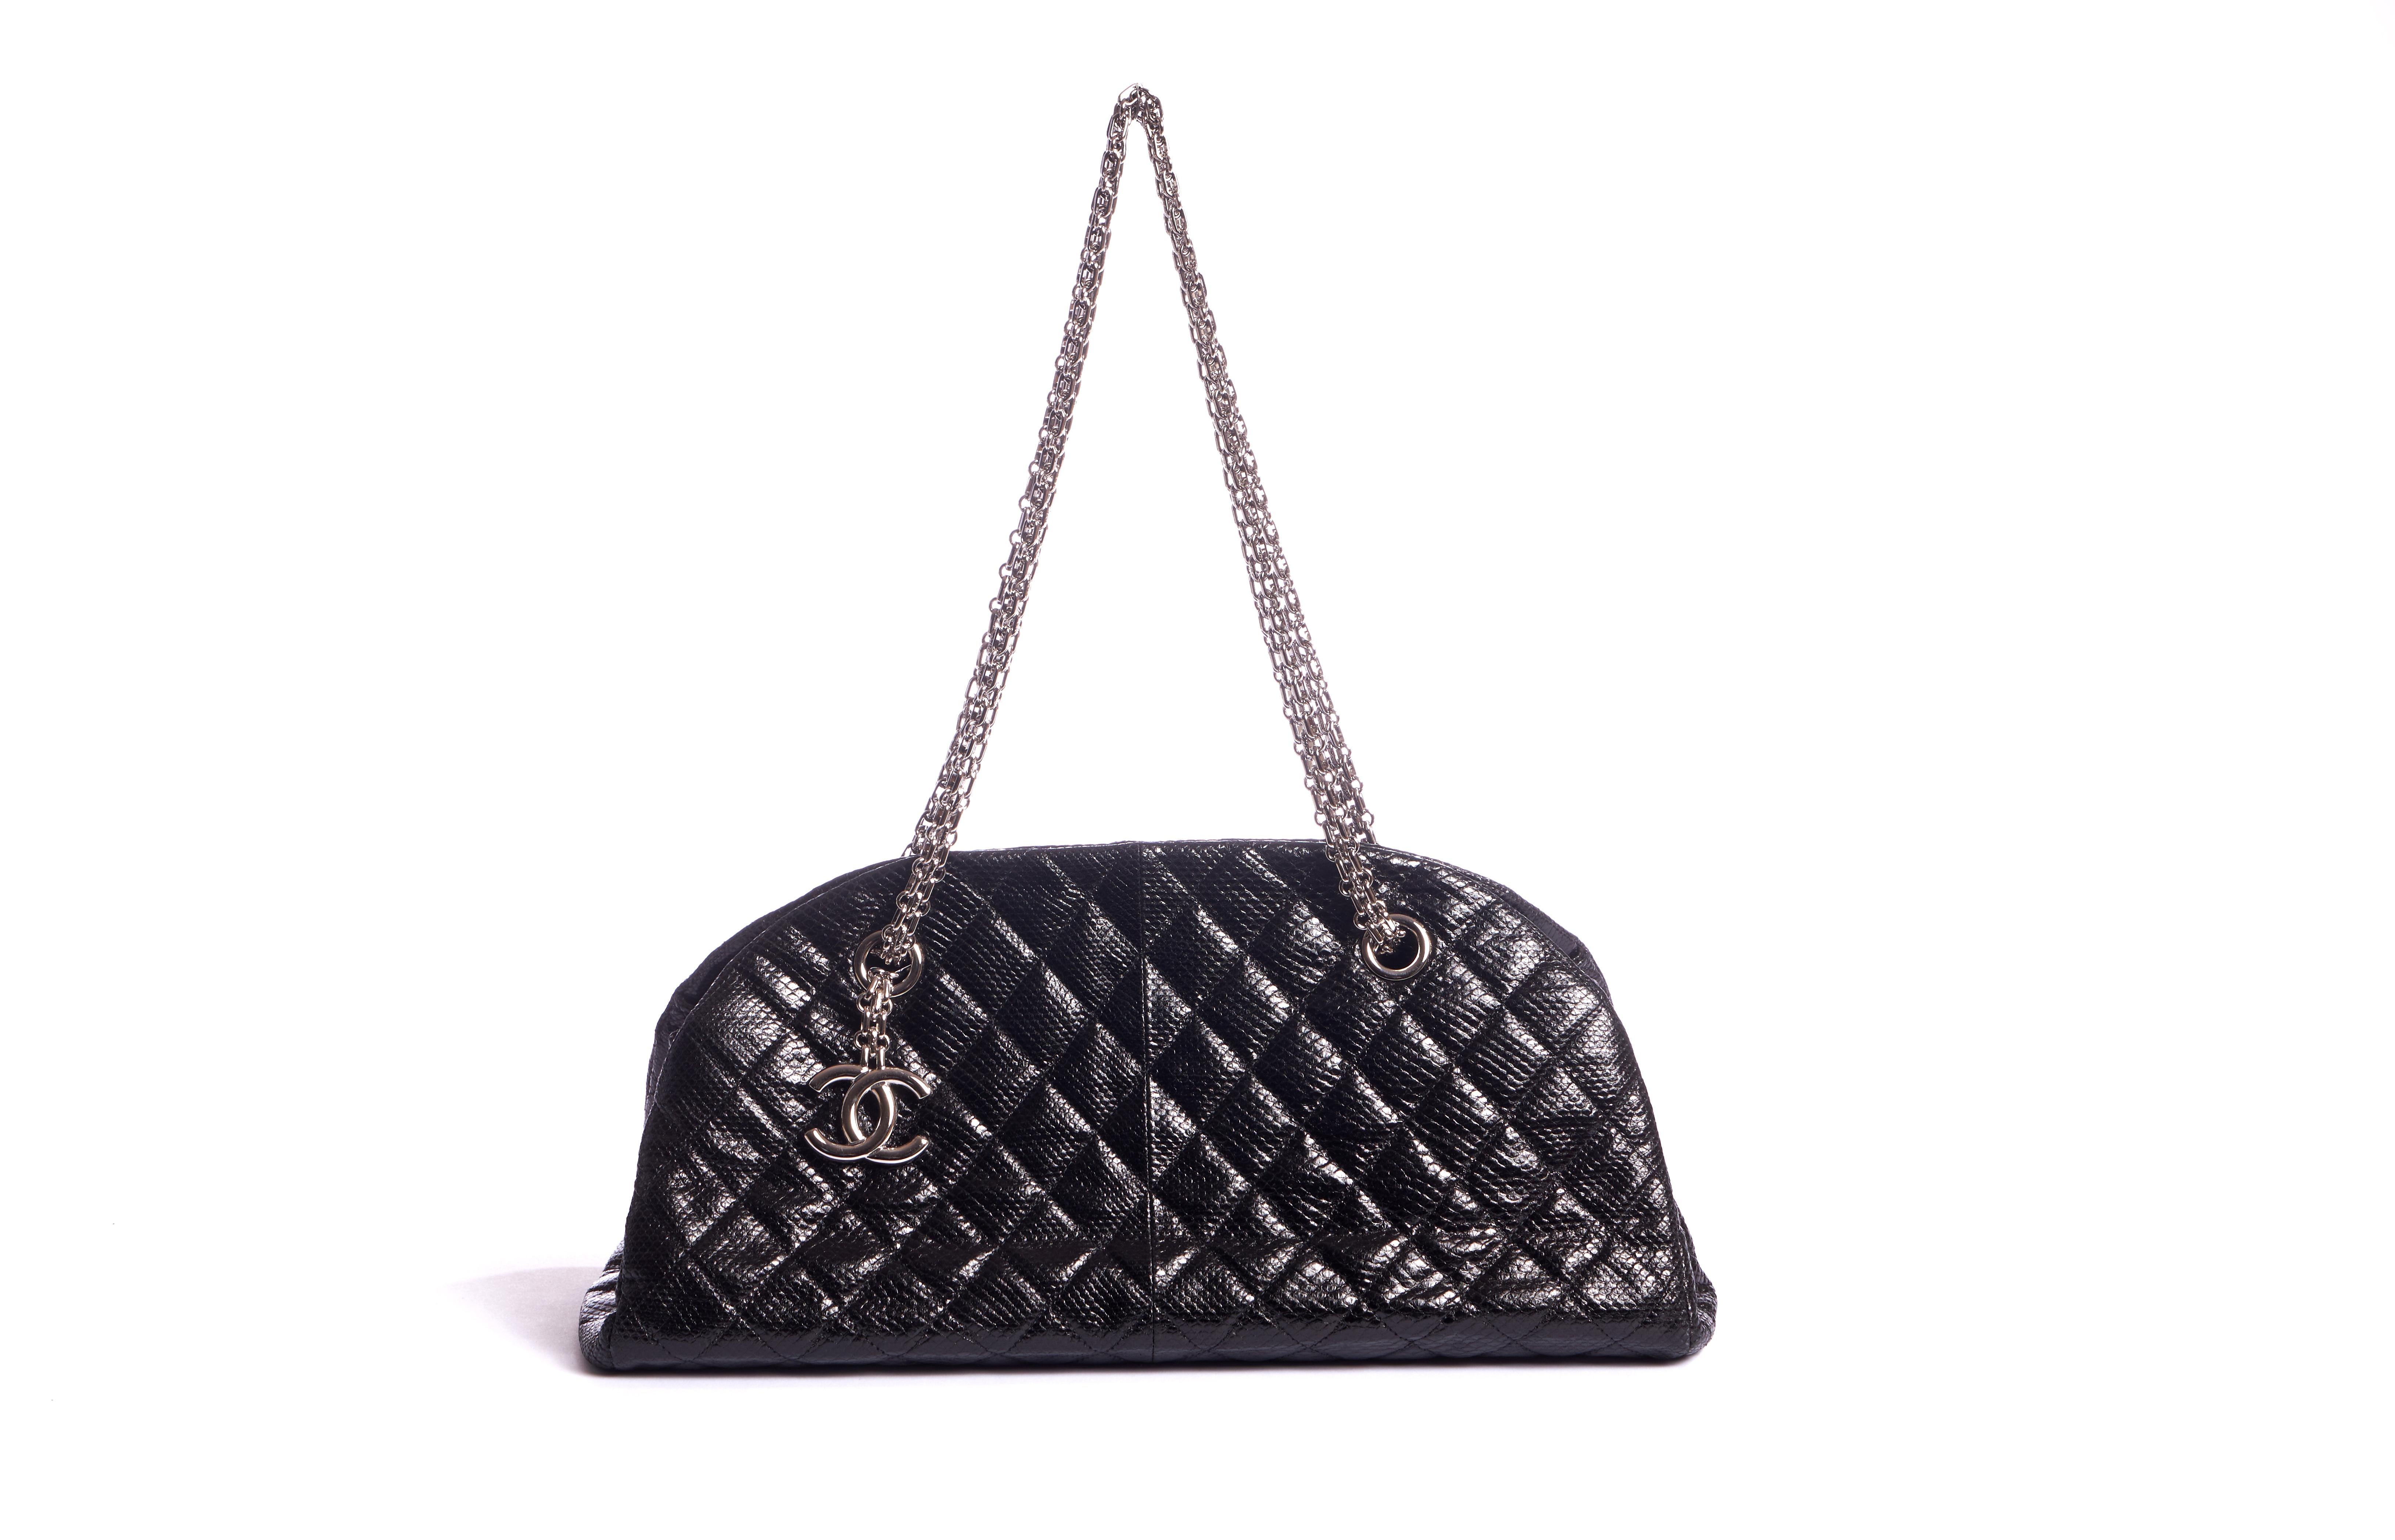 Chanel rare black lizard shoulder bag with dangling logo. Collection 2011/2011. Comes with hologram and original dust cover.